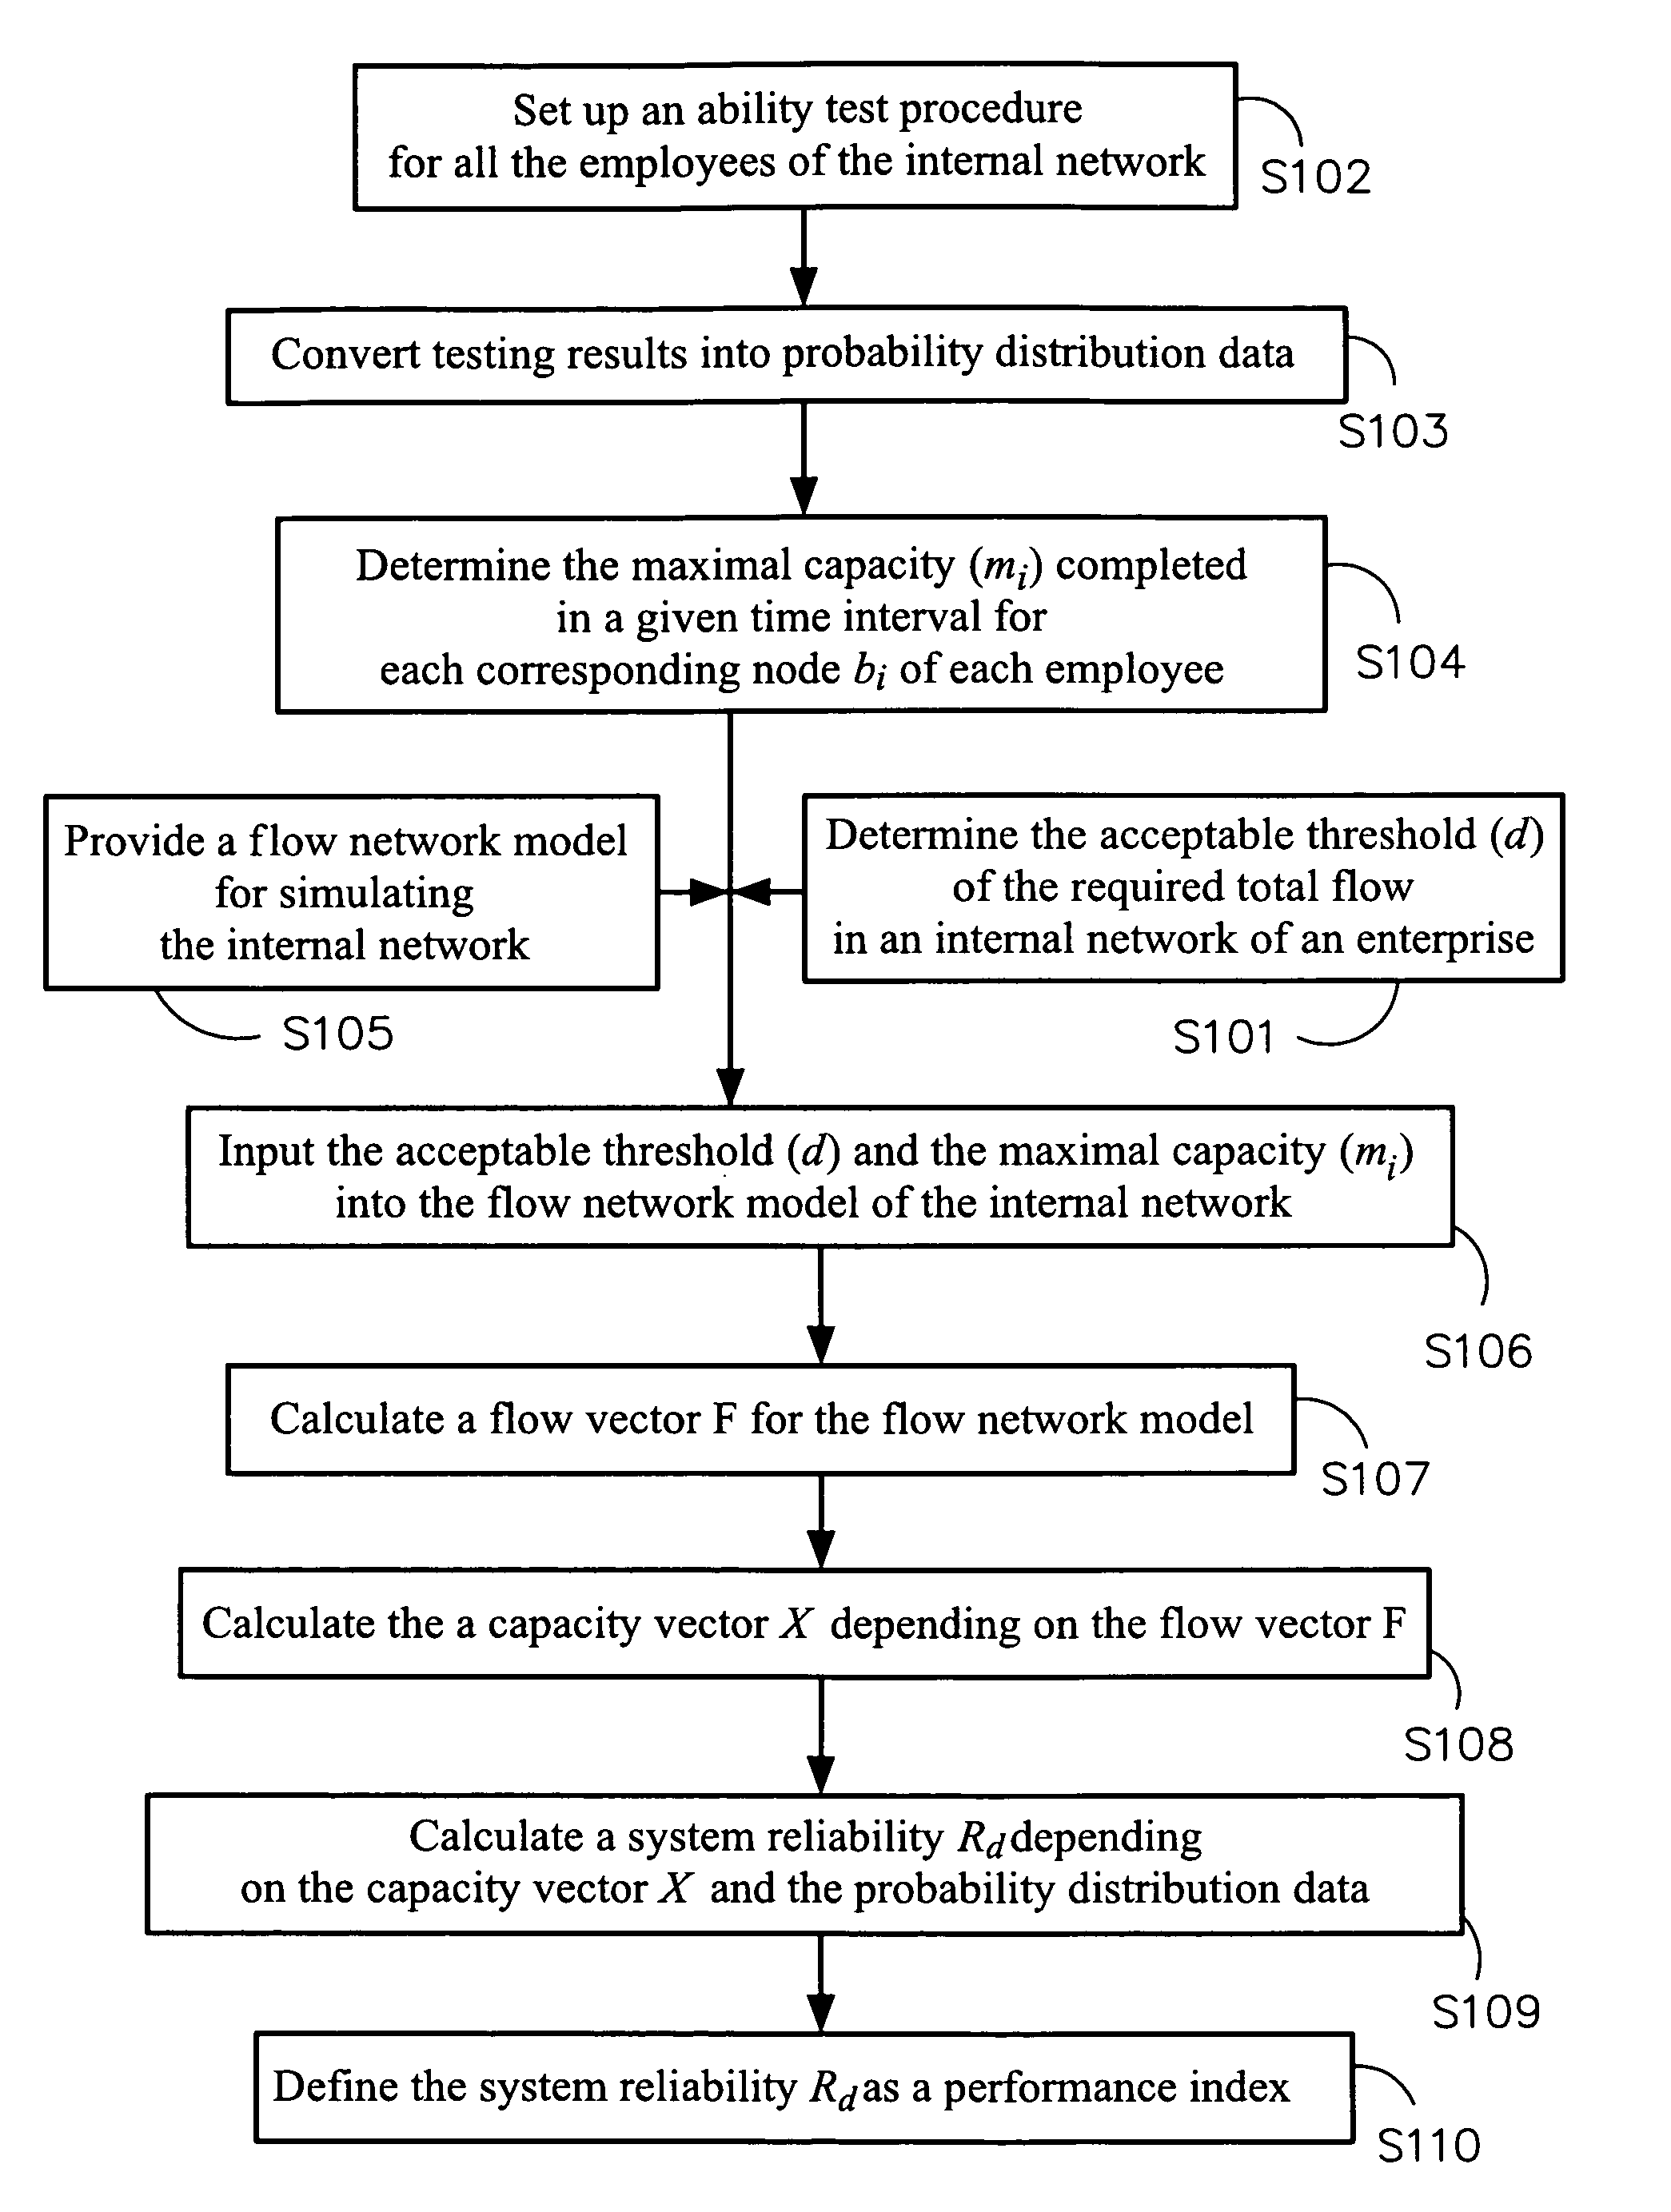 Method for evaluating performance of internal network in an enterprise